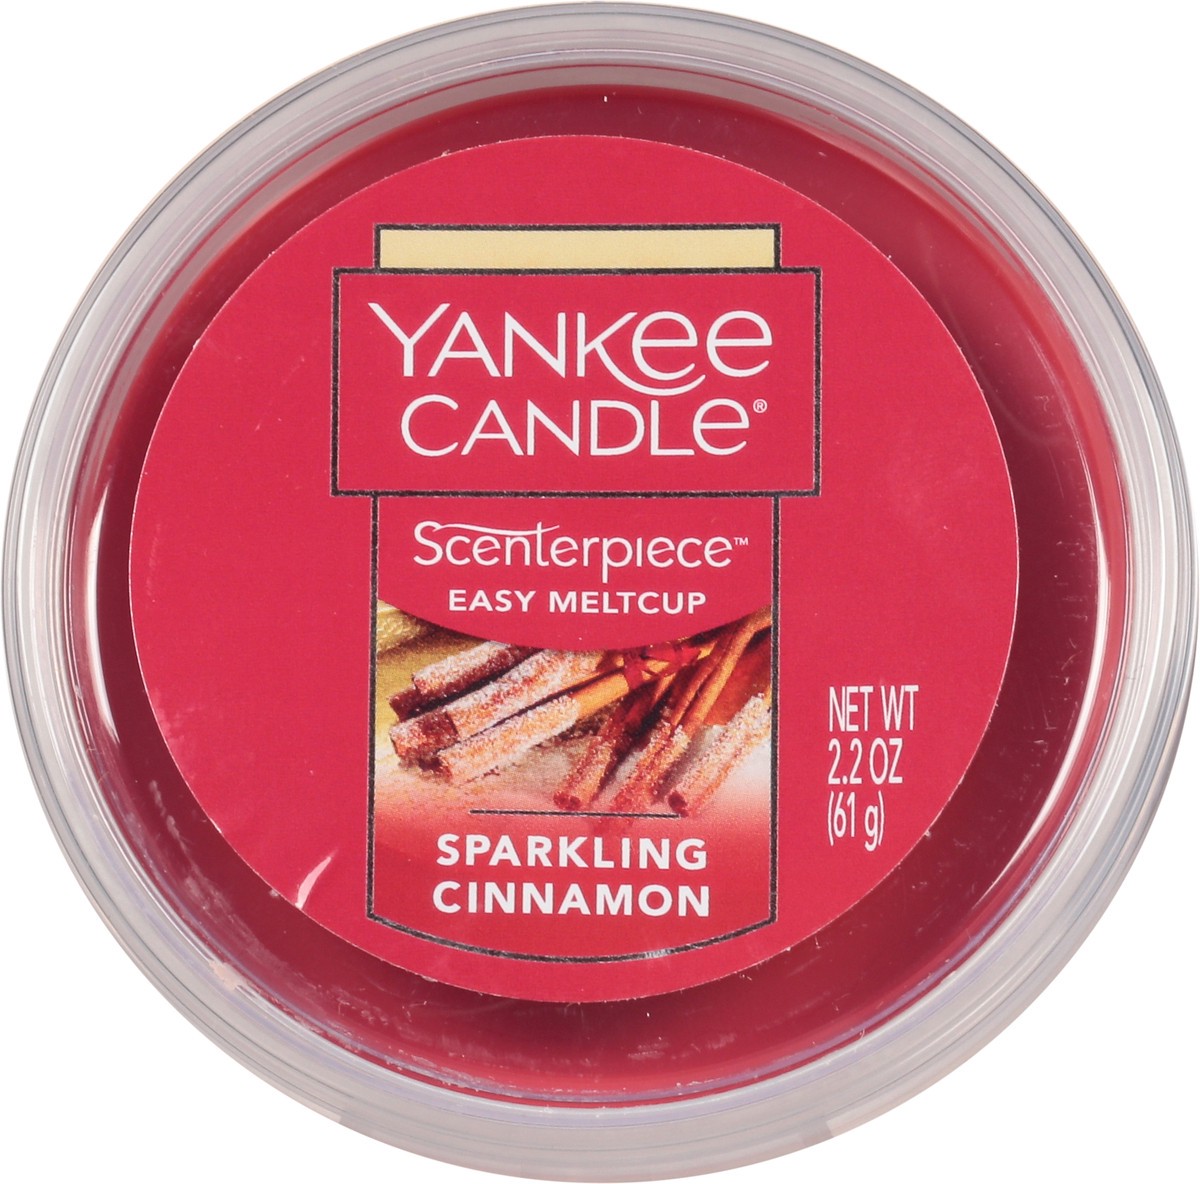 slide 4 of 11, Yankee Candle Scenterpiece Wax Cup Sparkling Cinnamon, 2.2 oz